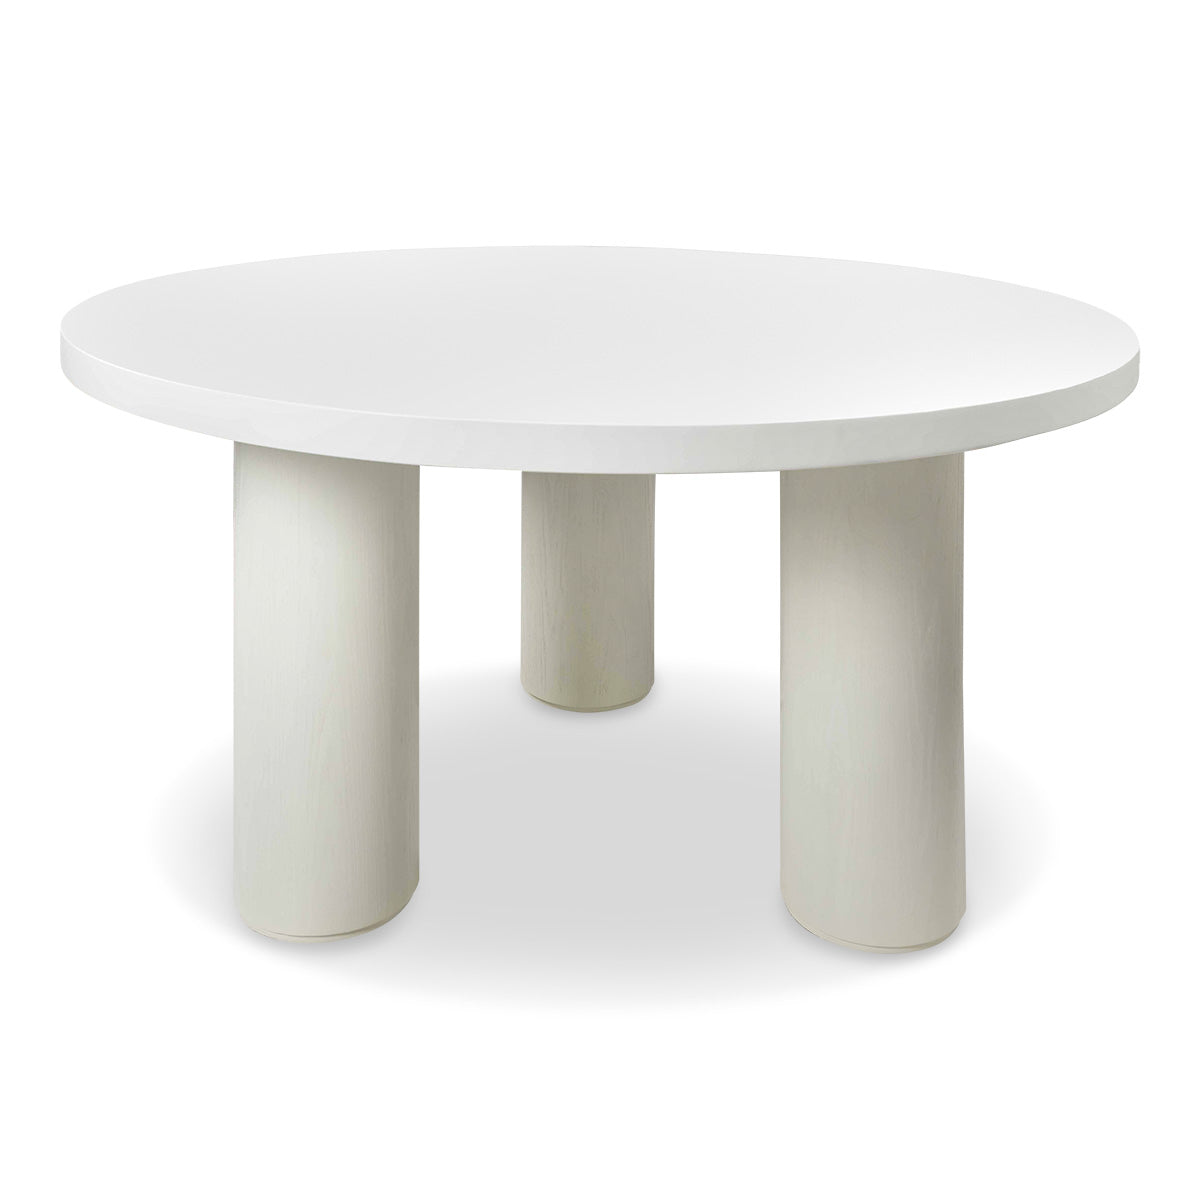 Oia Round Dining Table with Matte White Top and White Washed Oak Base